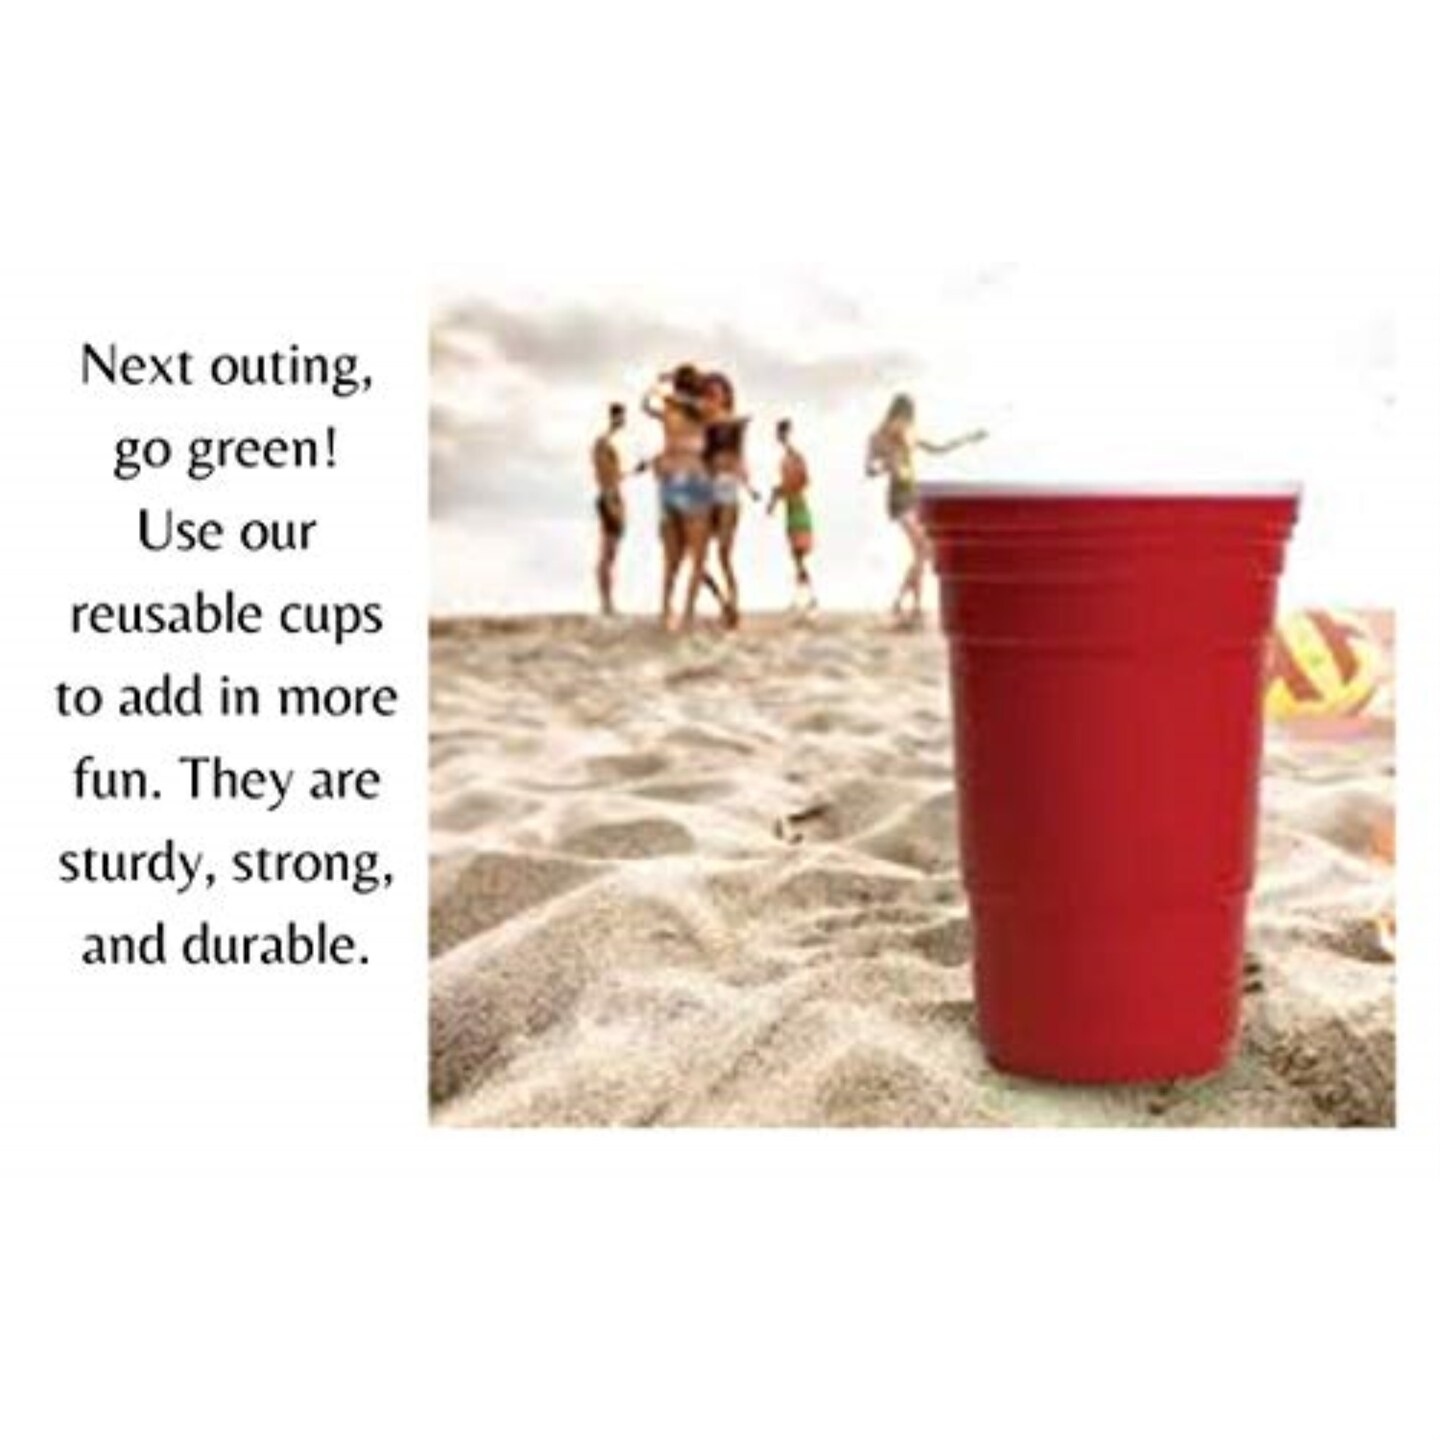 Red Cup Living 32 oz Reusable Cup